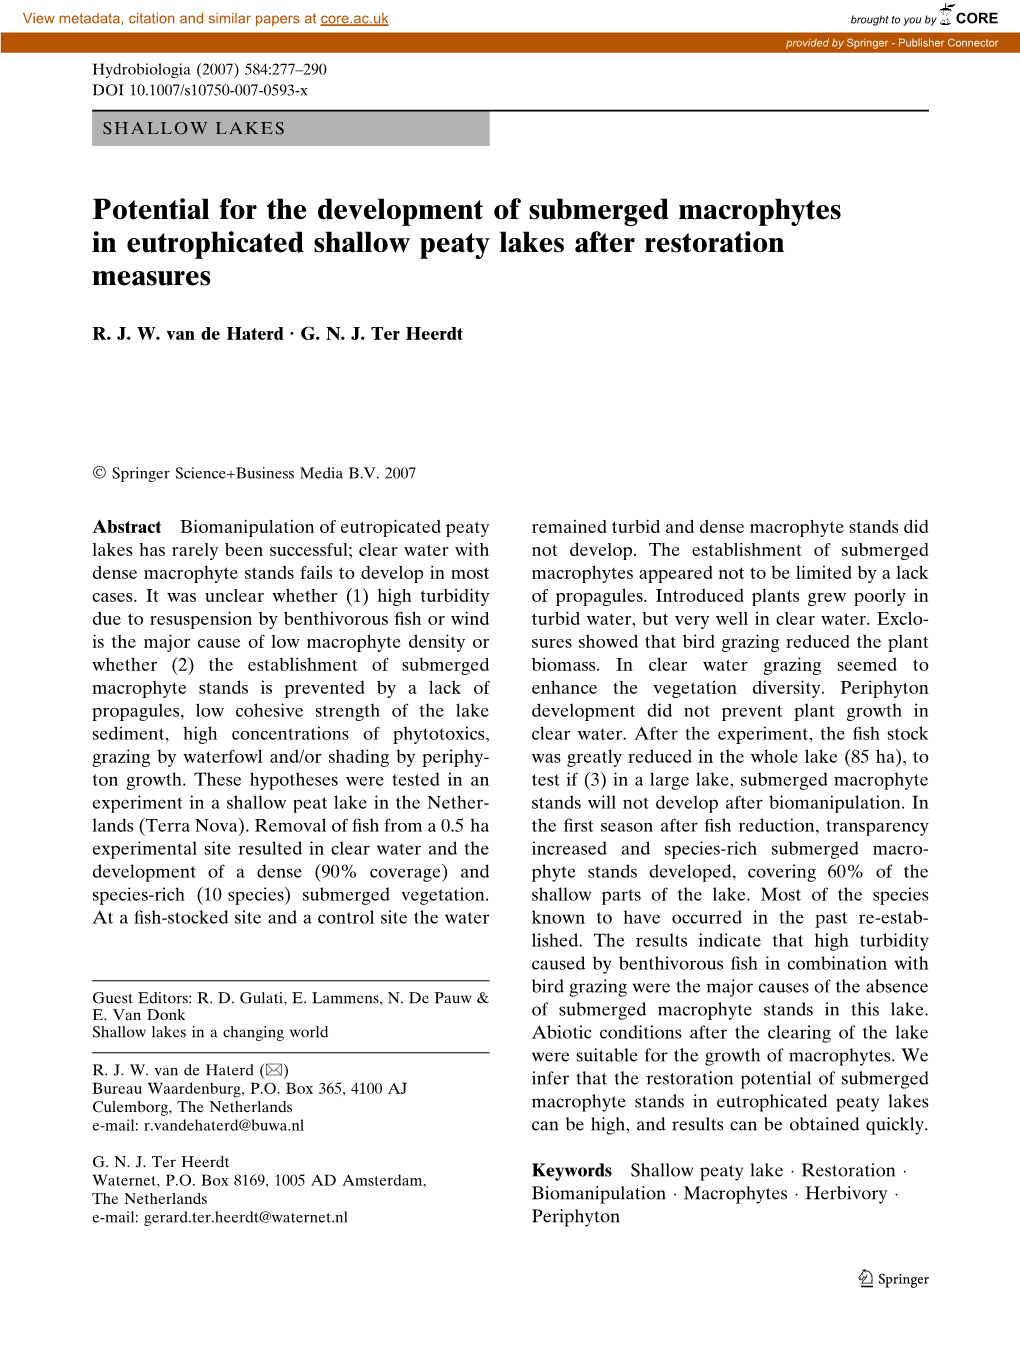 Potential for the Development of Submerged Macrophytes in Eutrophicated Shallow Peaty Lakes After Restoration Measures